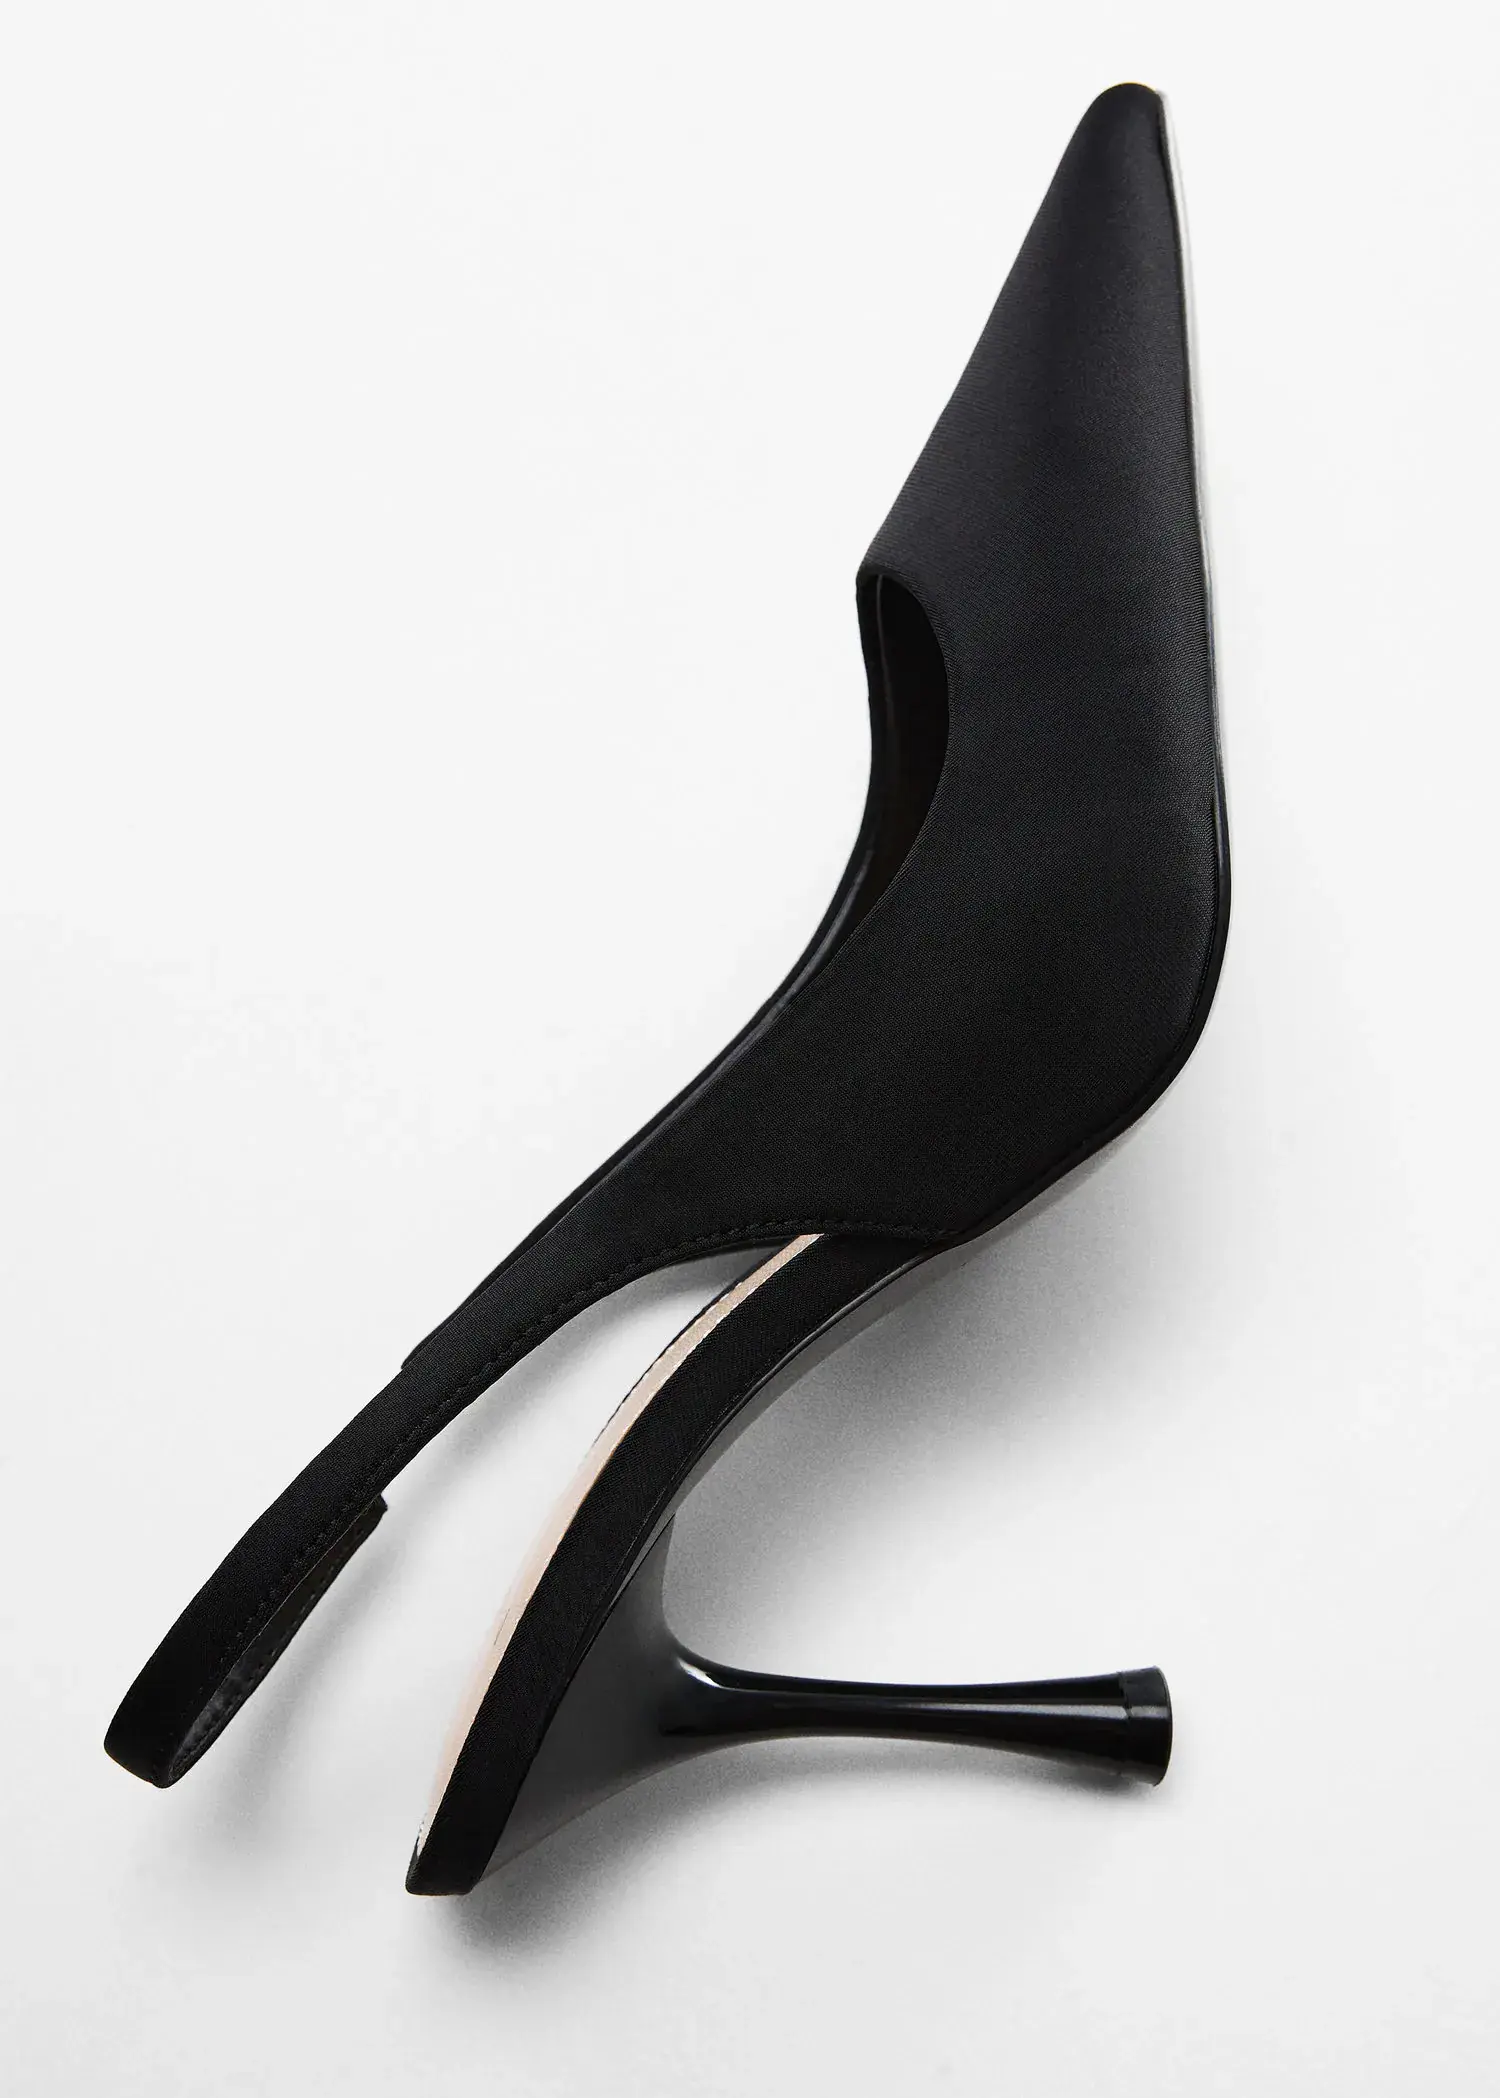 Mango High-heeled shoes. a pair of high heeled shoes on a white surface. 